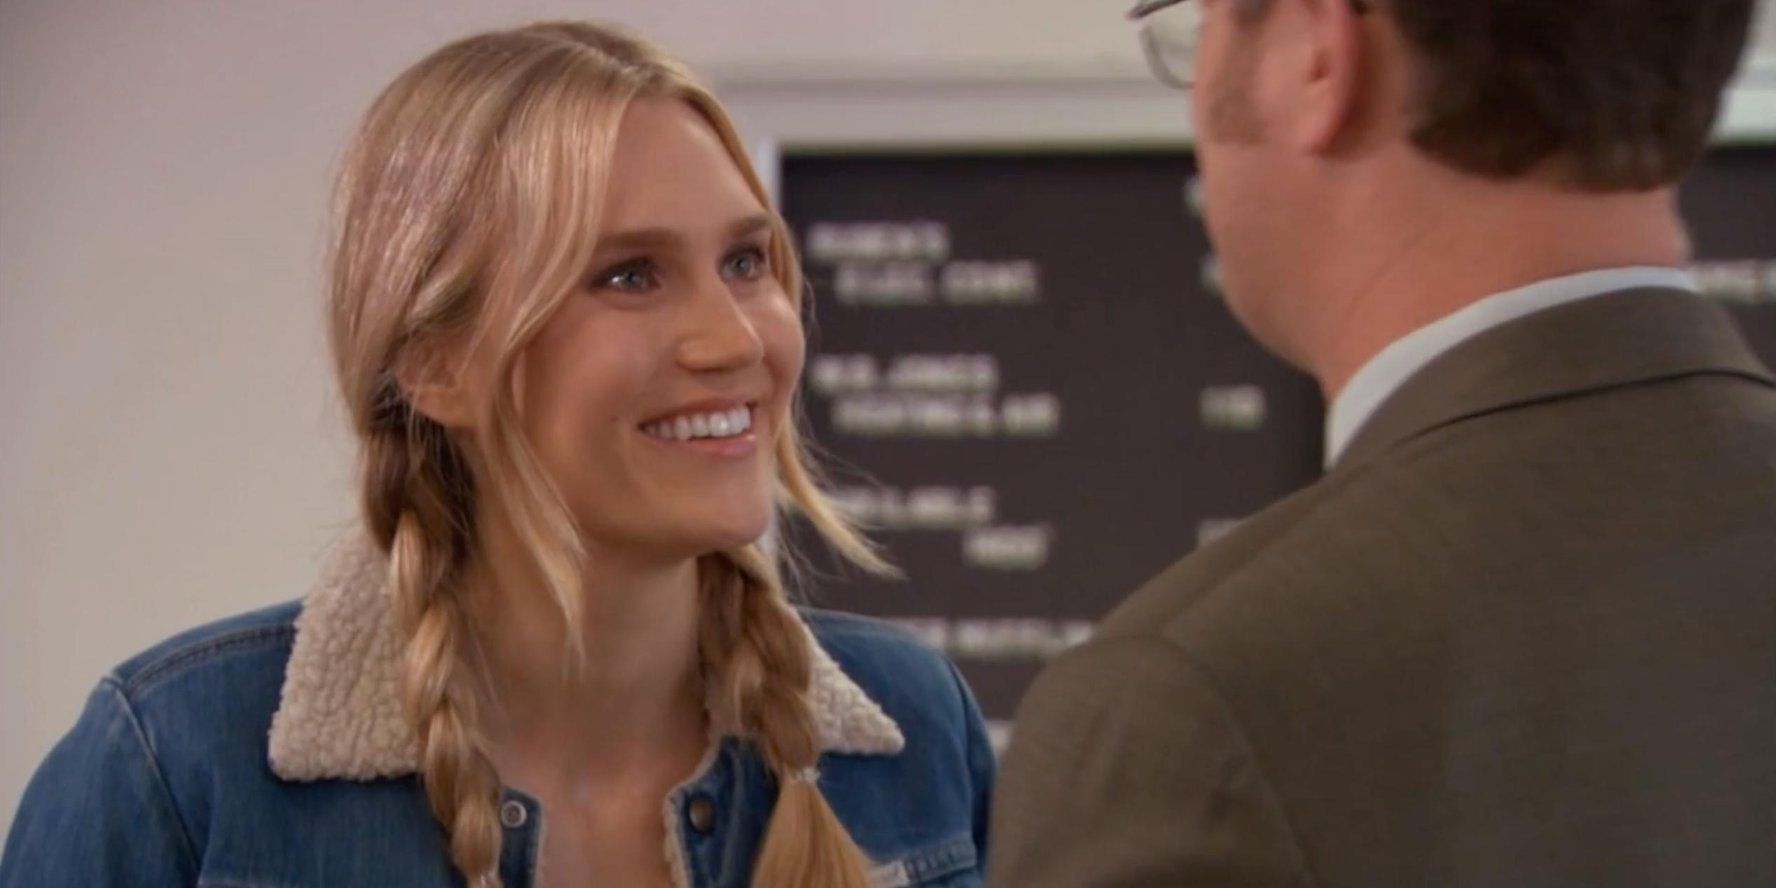 Esther in jean jacket, smiling at Dwight